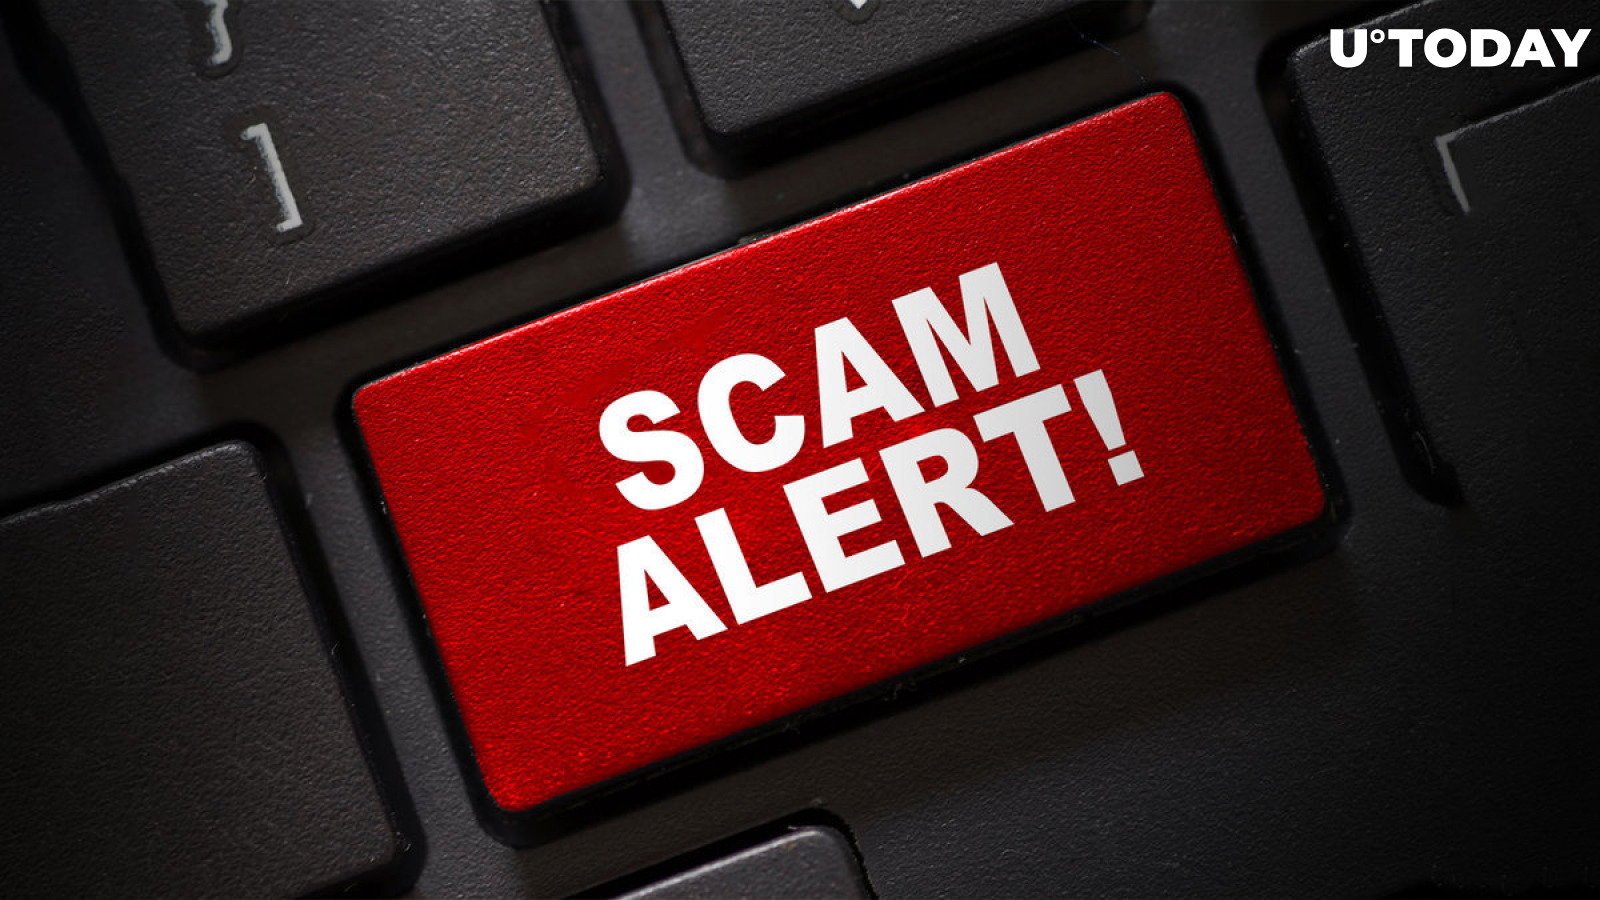 Kokomo Finance Steals $1.5 Million of Users' Funds Doing Contract Trick: Scam Alert